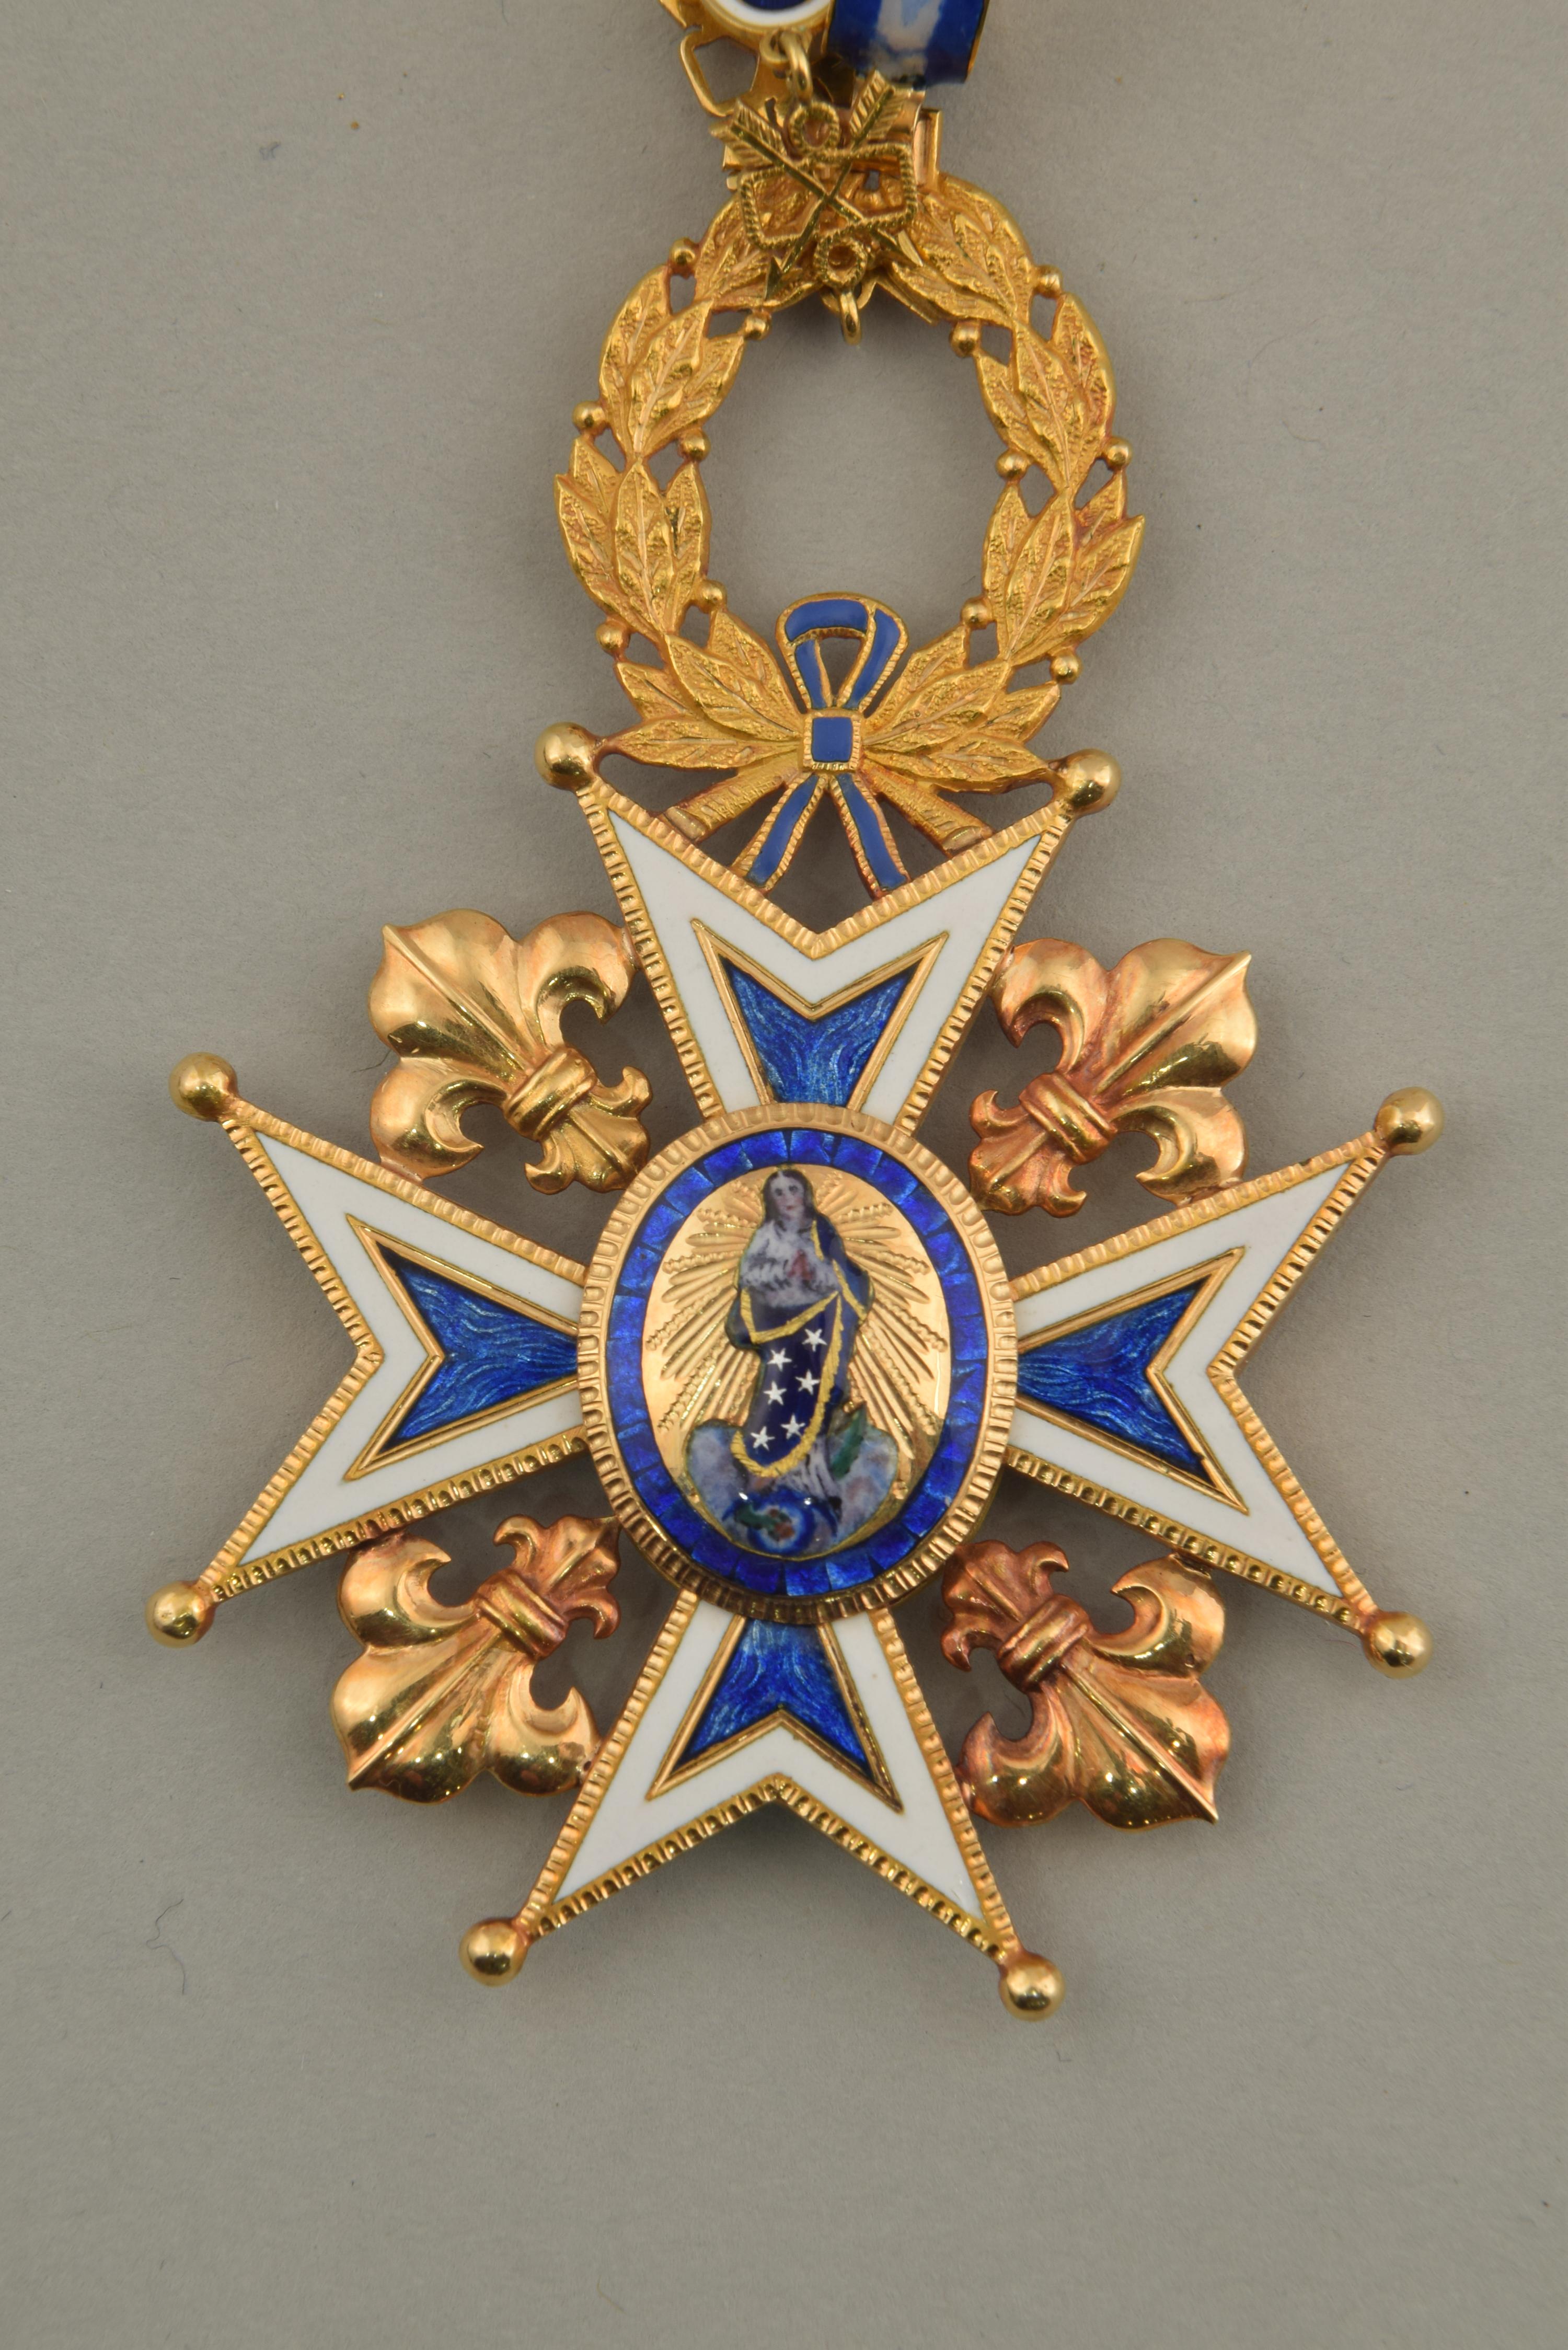 Neoclassical Revival Insignia, Order of Charles III and Order of Isabella the Catholic, Spain, 19th C